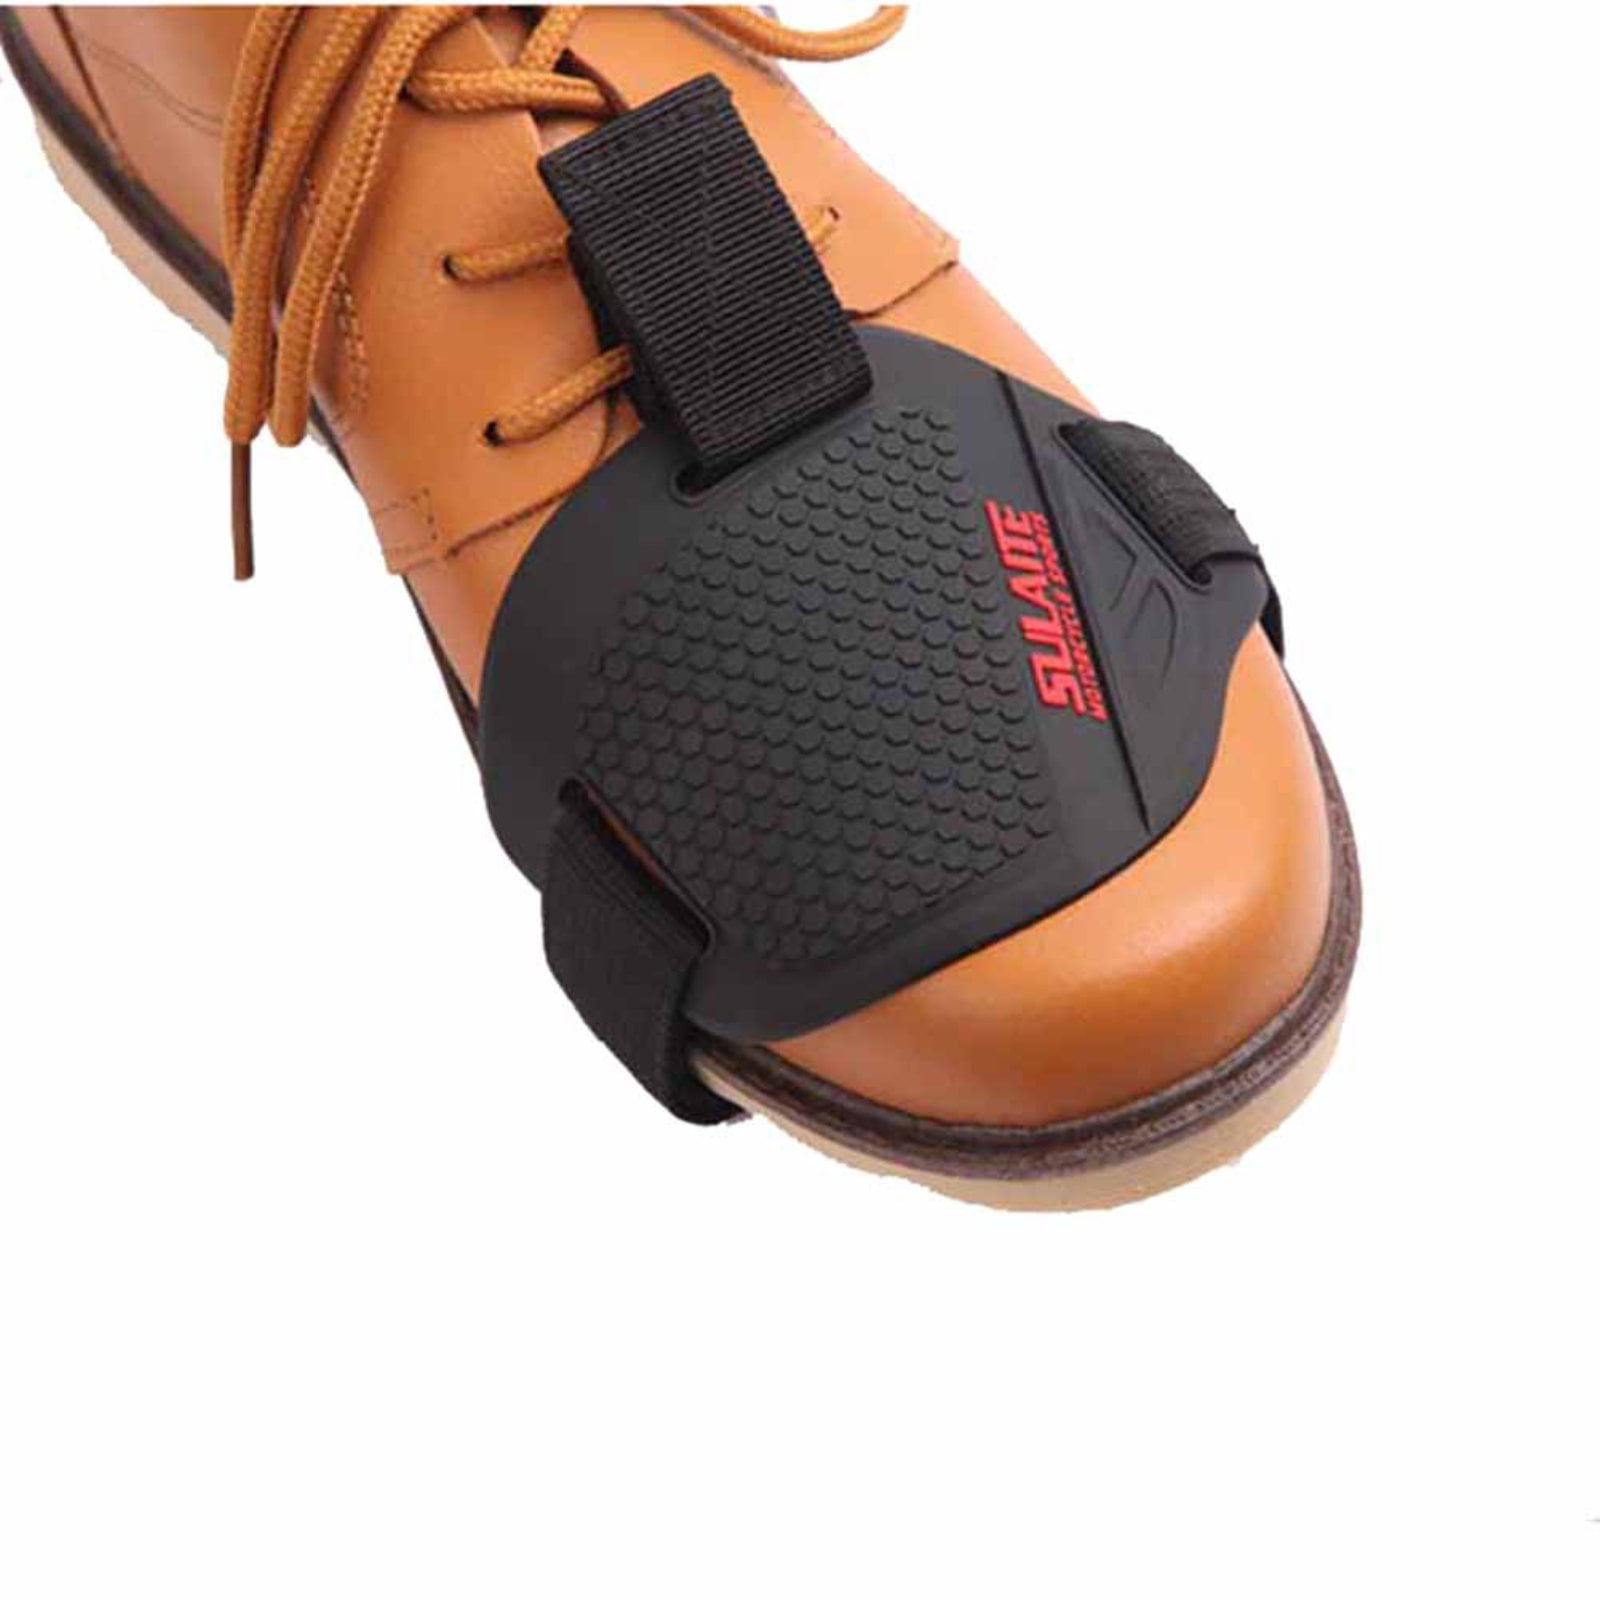 Motorcycle gear shift pad motorcycle protection gear Motorcycle protection gear shift pad Shoes Boots Wear protector Shifter guard Suitable for motorcycle protection. 